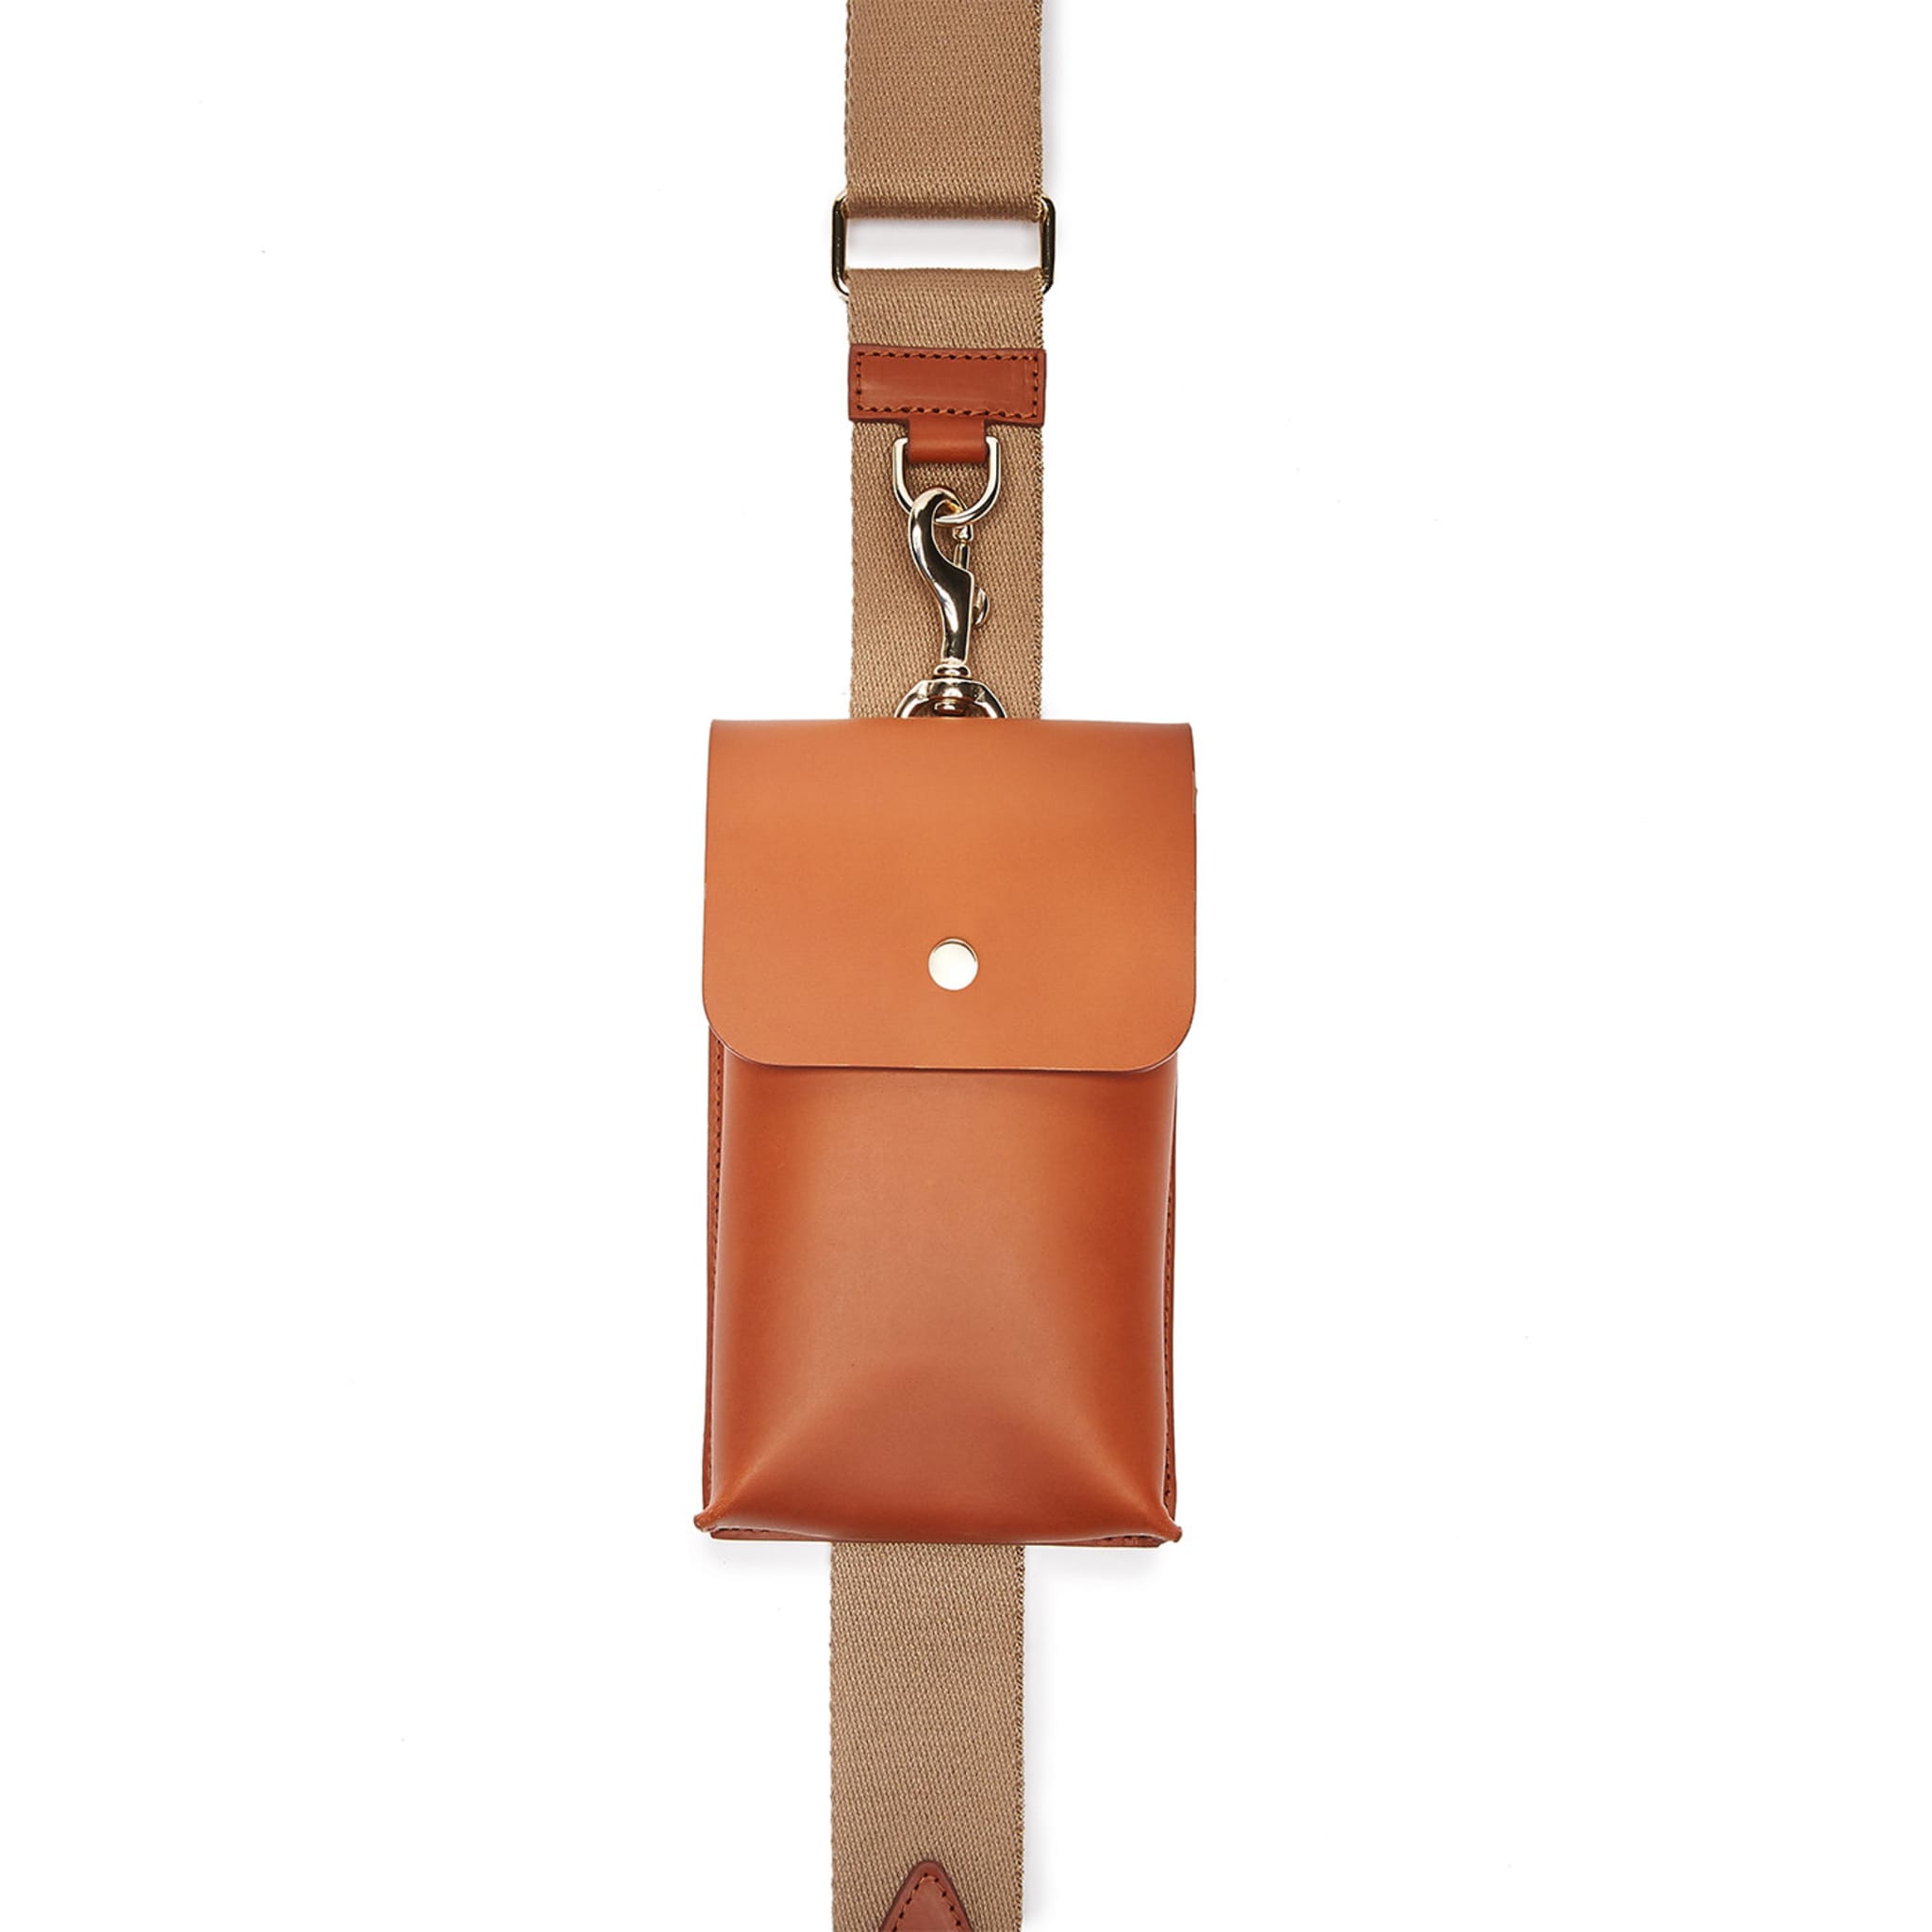 Tan Leather New Bottle Bag with Steel Bottle - Alternative view 1